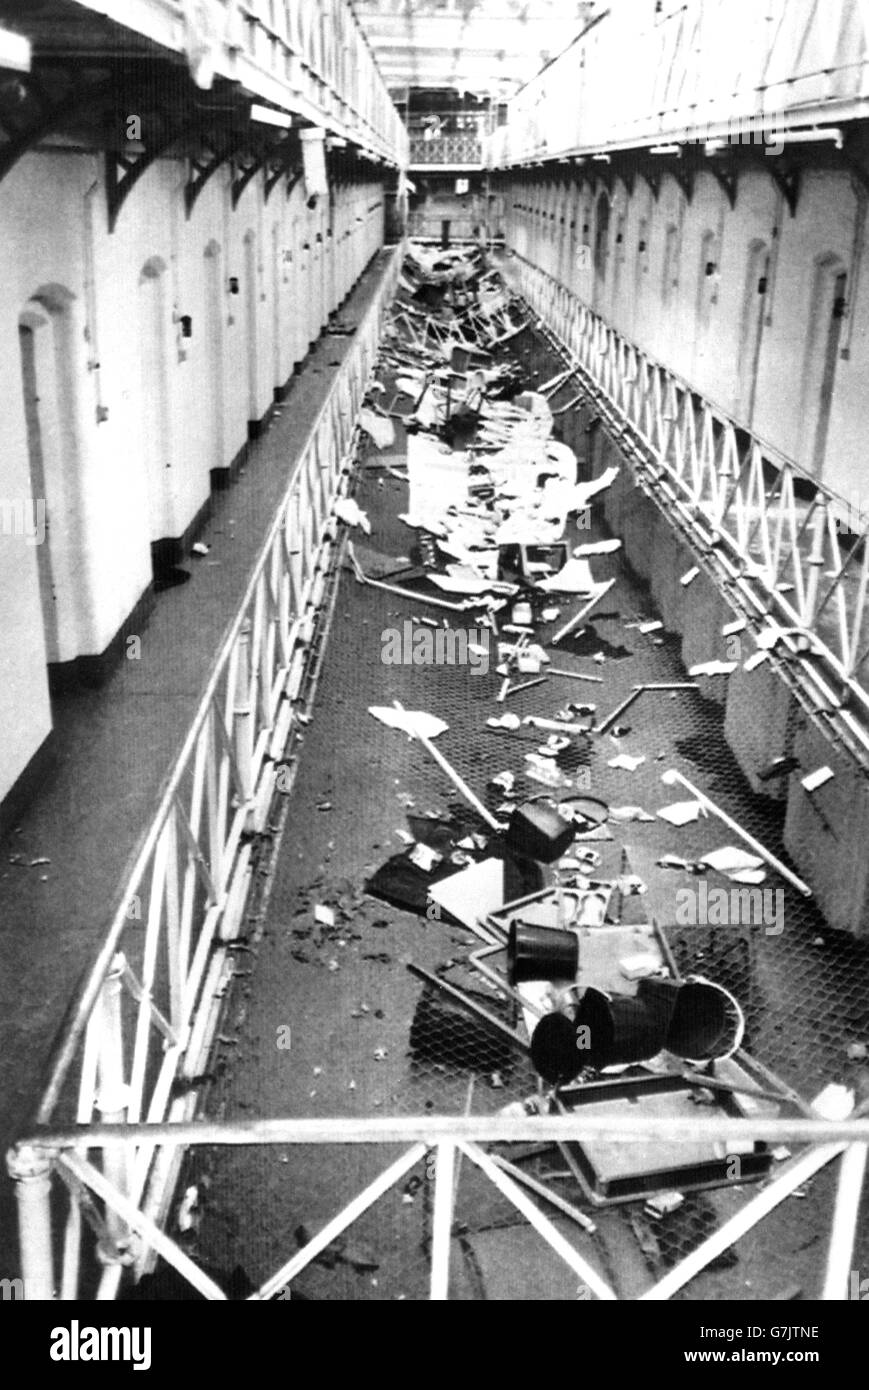 The scene on one of the landings at Strangeways prison in Manchester after prisoners ran riot during the 25-day siege. Stock Photo